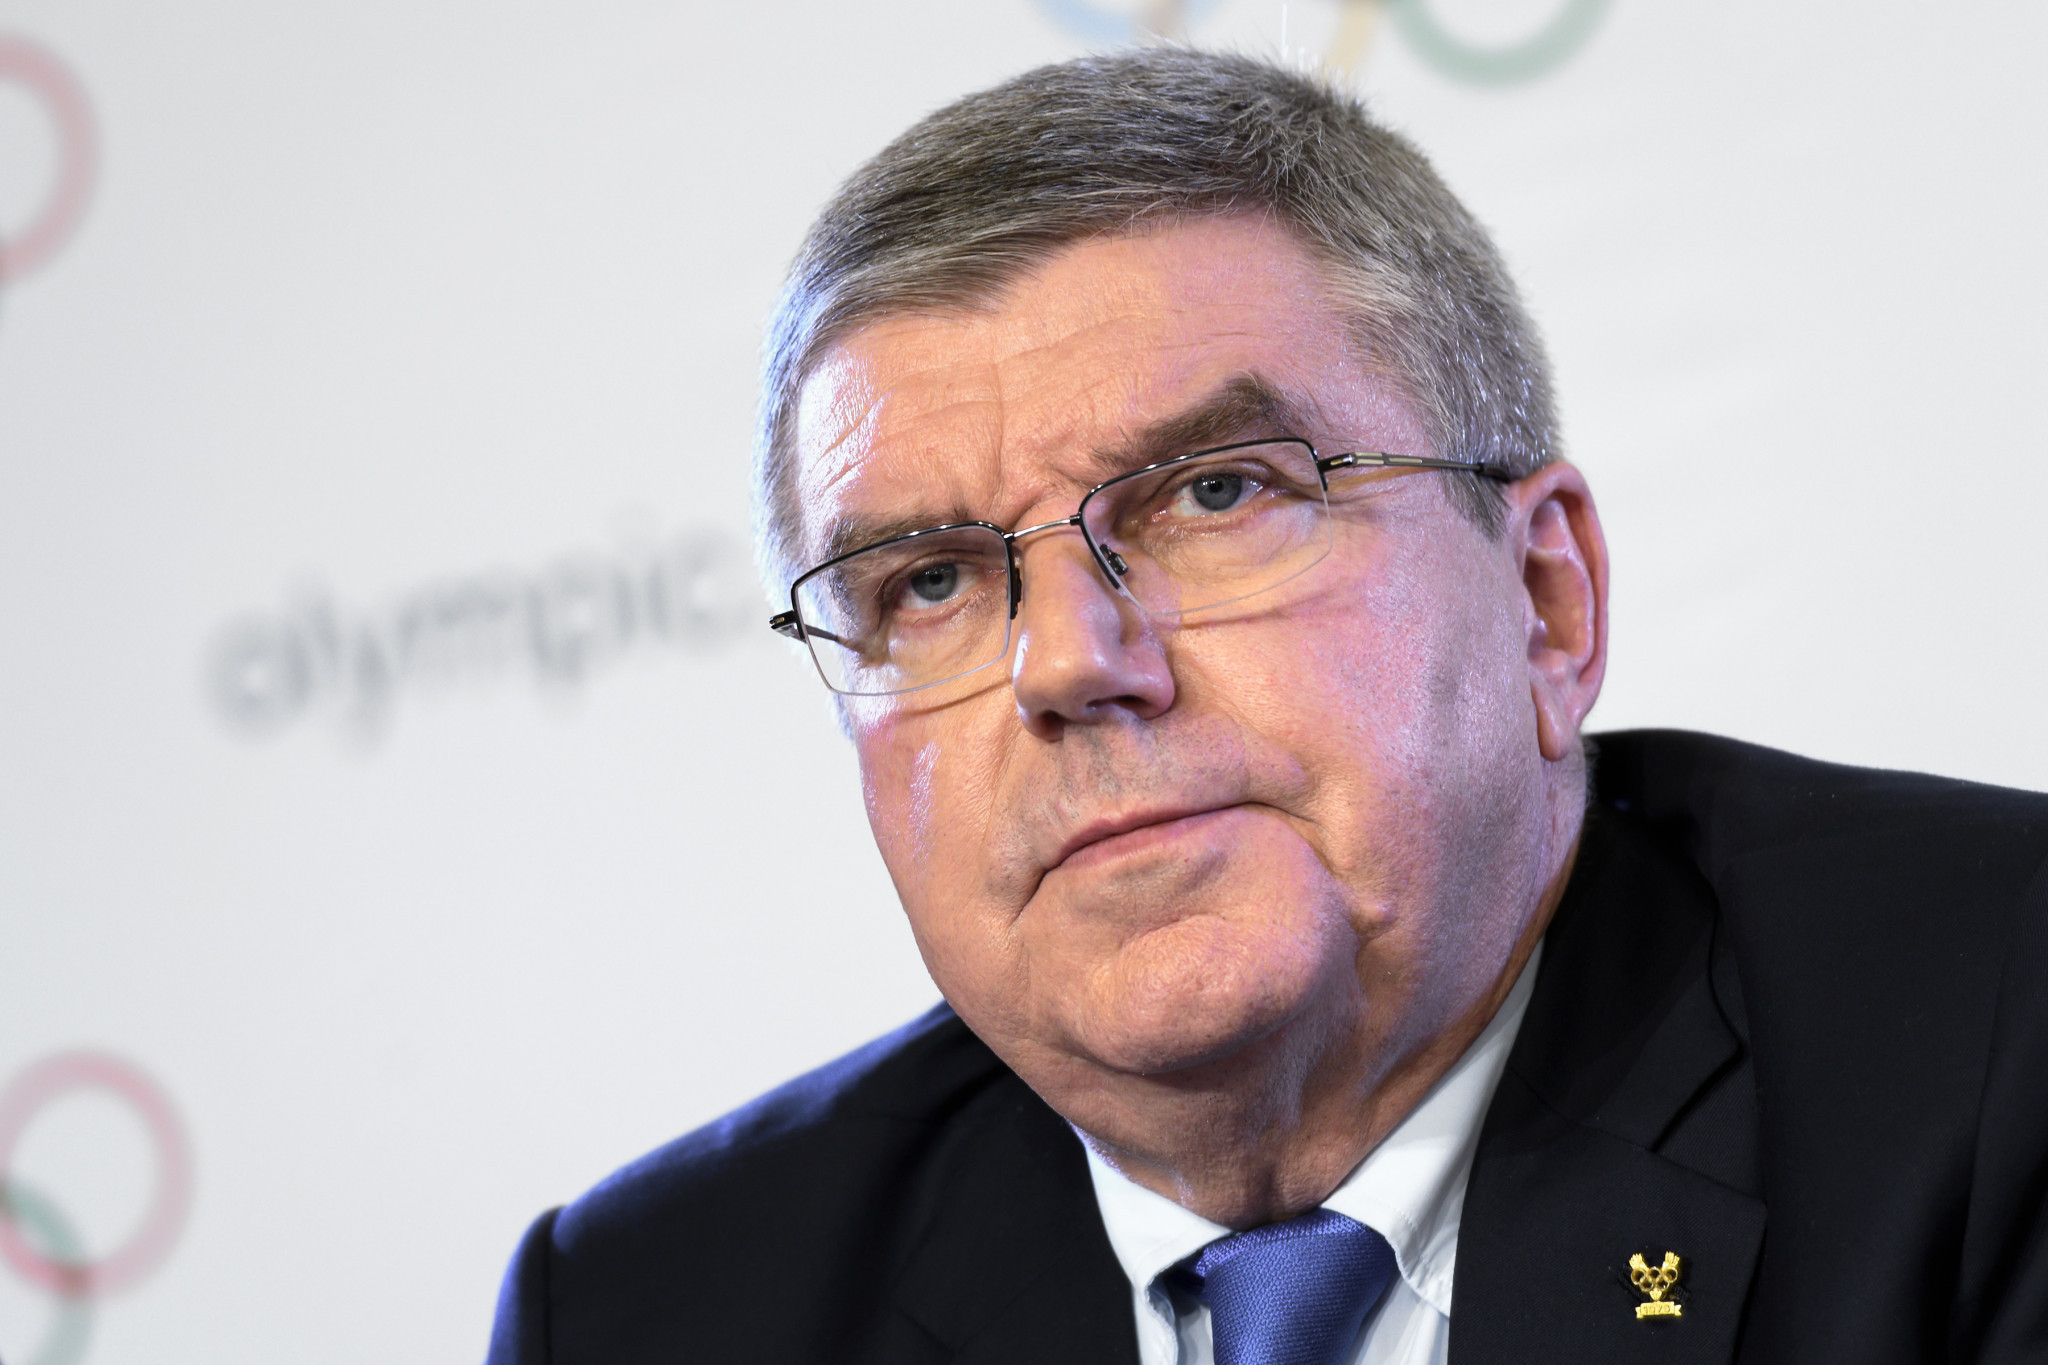 The IOC have claimed it "pure speculation" that Thomas Bach might visit North Korea ©Getty Images